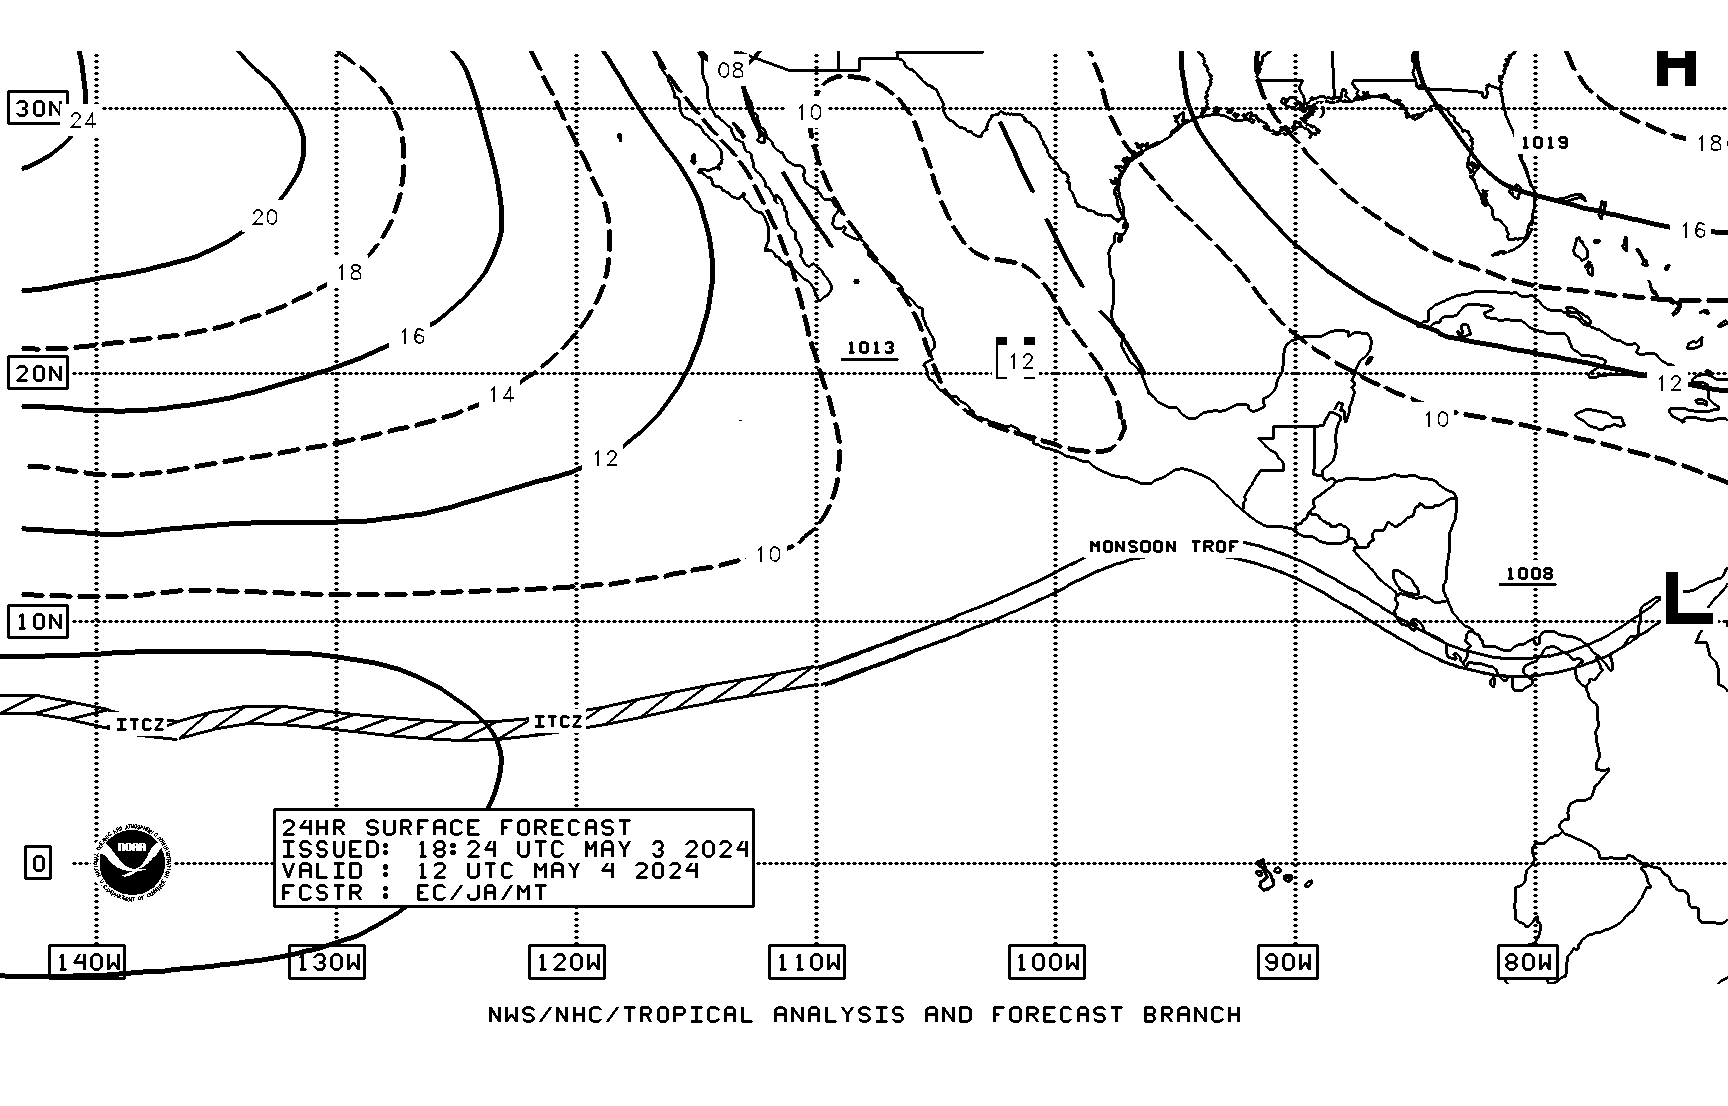 24 hour SE Pacific surface